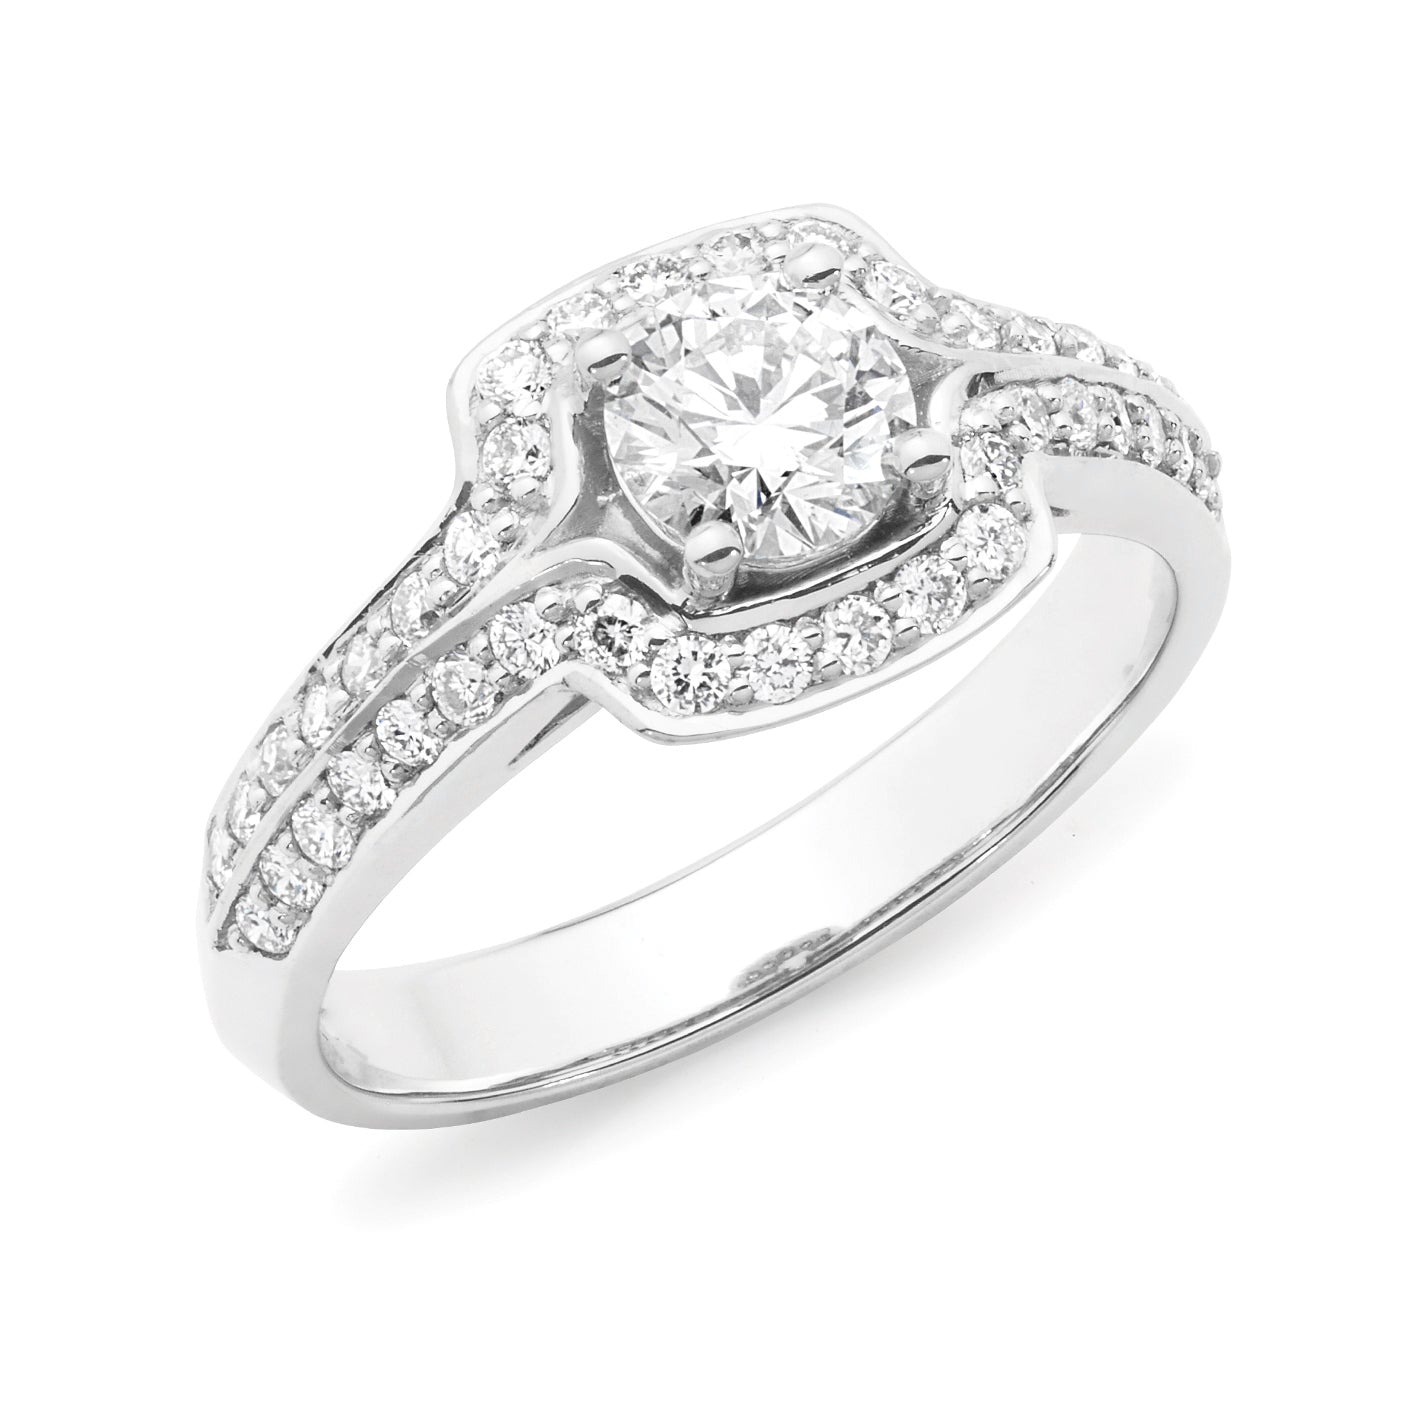 Diamond Set Halo-Style Engagement Ring in 18ct White Gold